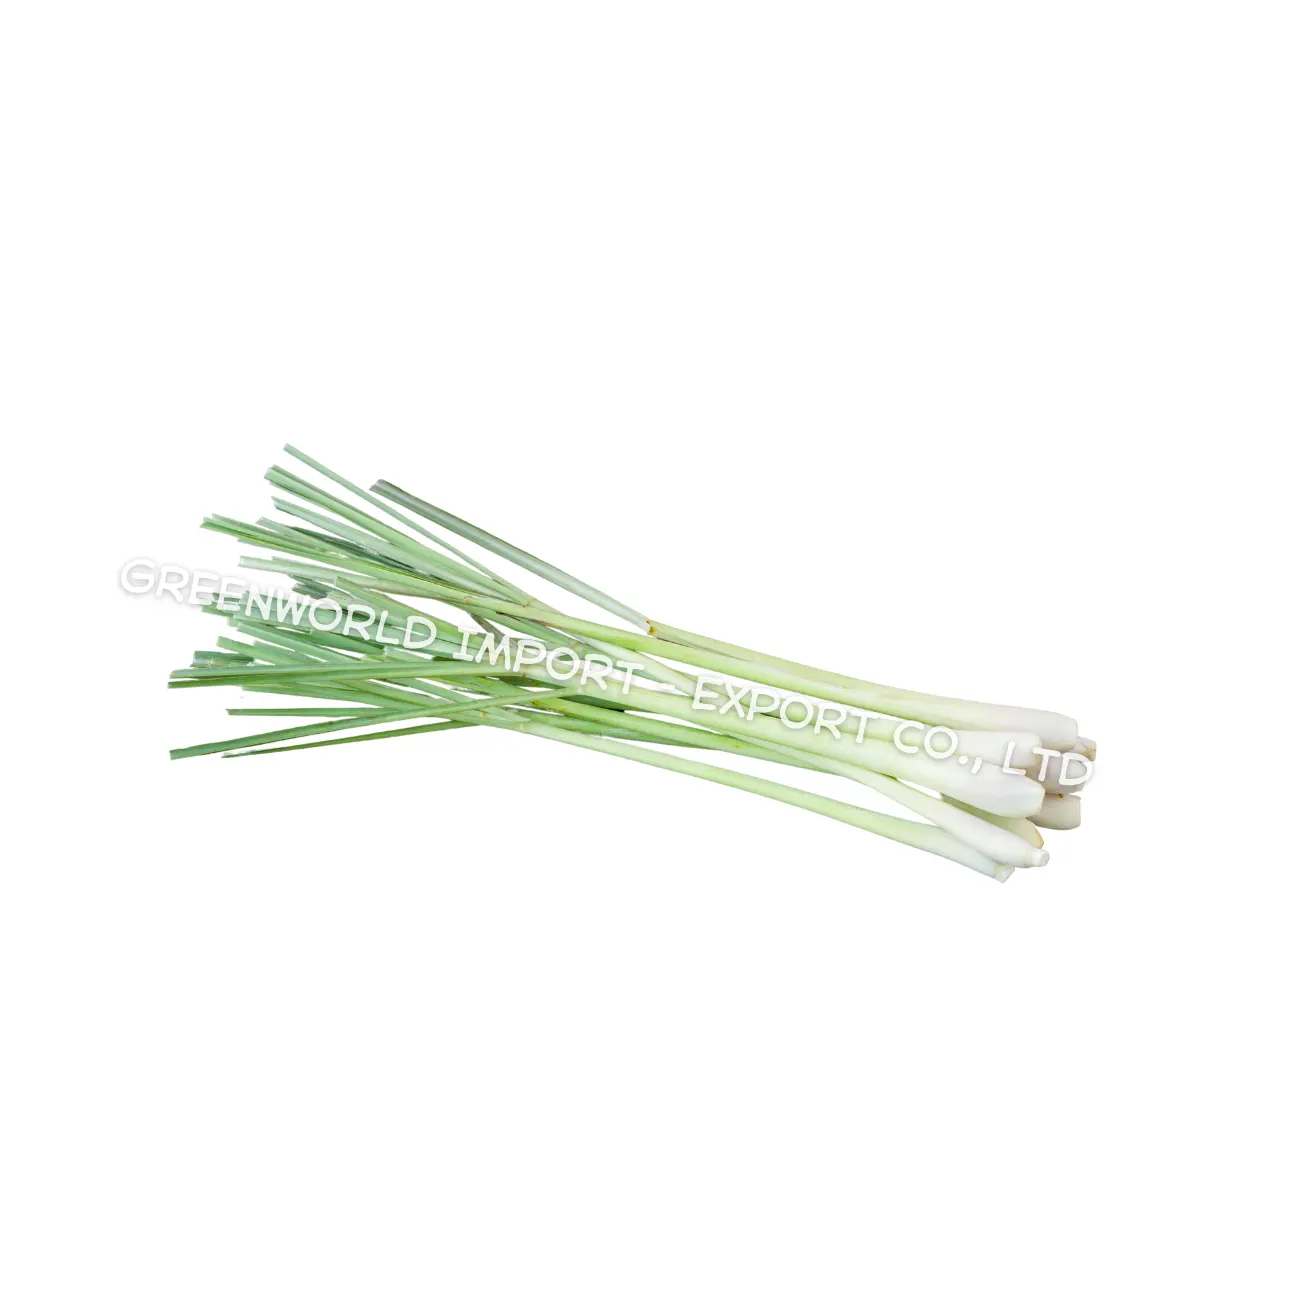 BEST FROZEN CITRONELLA - LEMONGRASS FROZEN HIGH QUALITY FROM VIETNAM - SPICES MAKE YOUR FOOD DELICIOUS AND GOOD FOR HEALTH